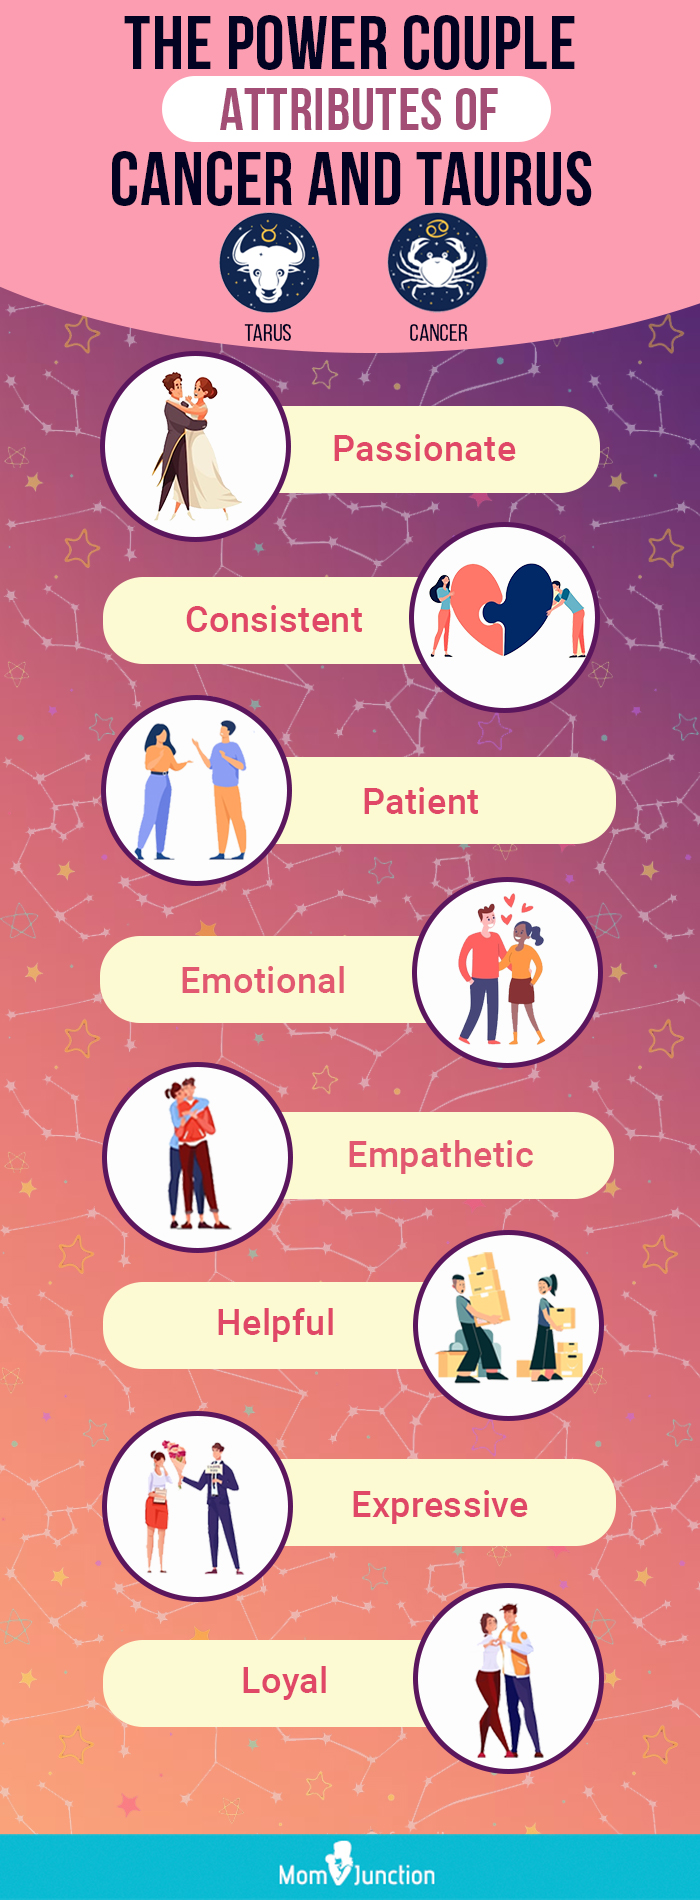 the power couple attributes of cancer and taurus [infographic]